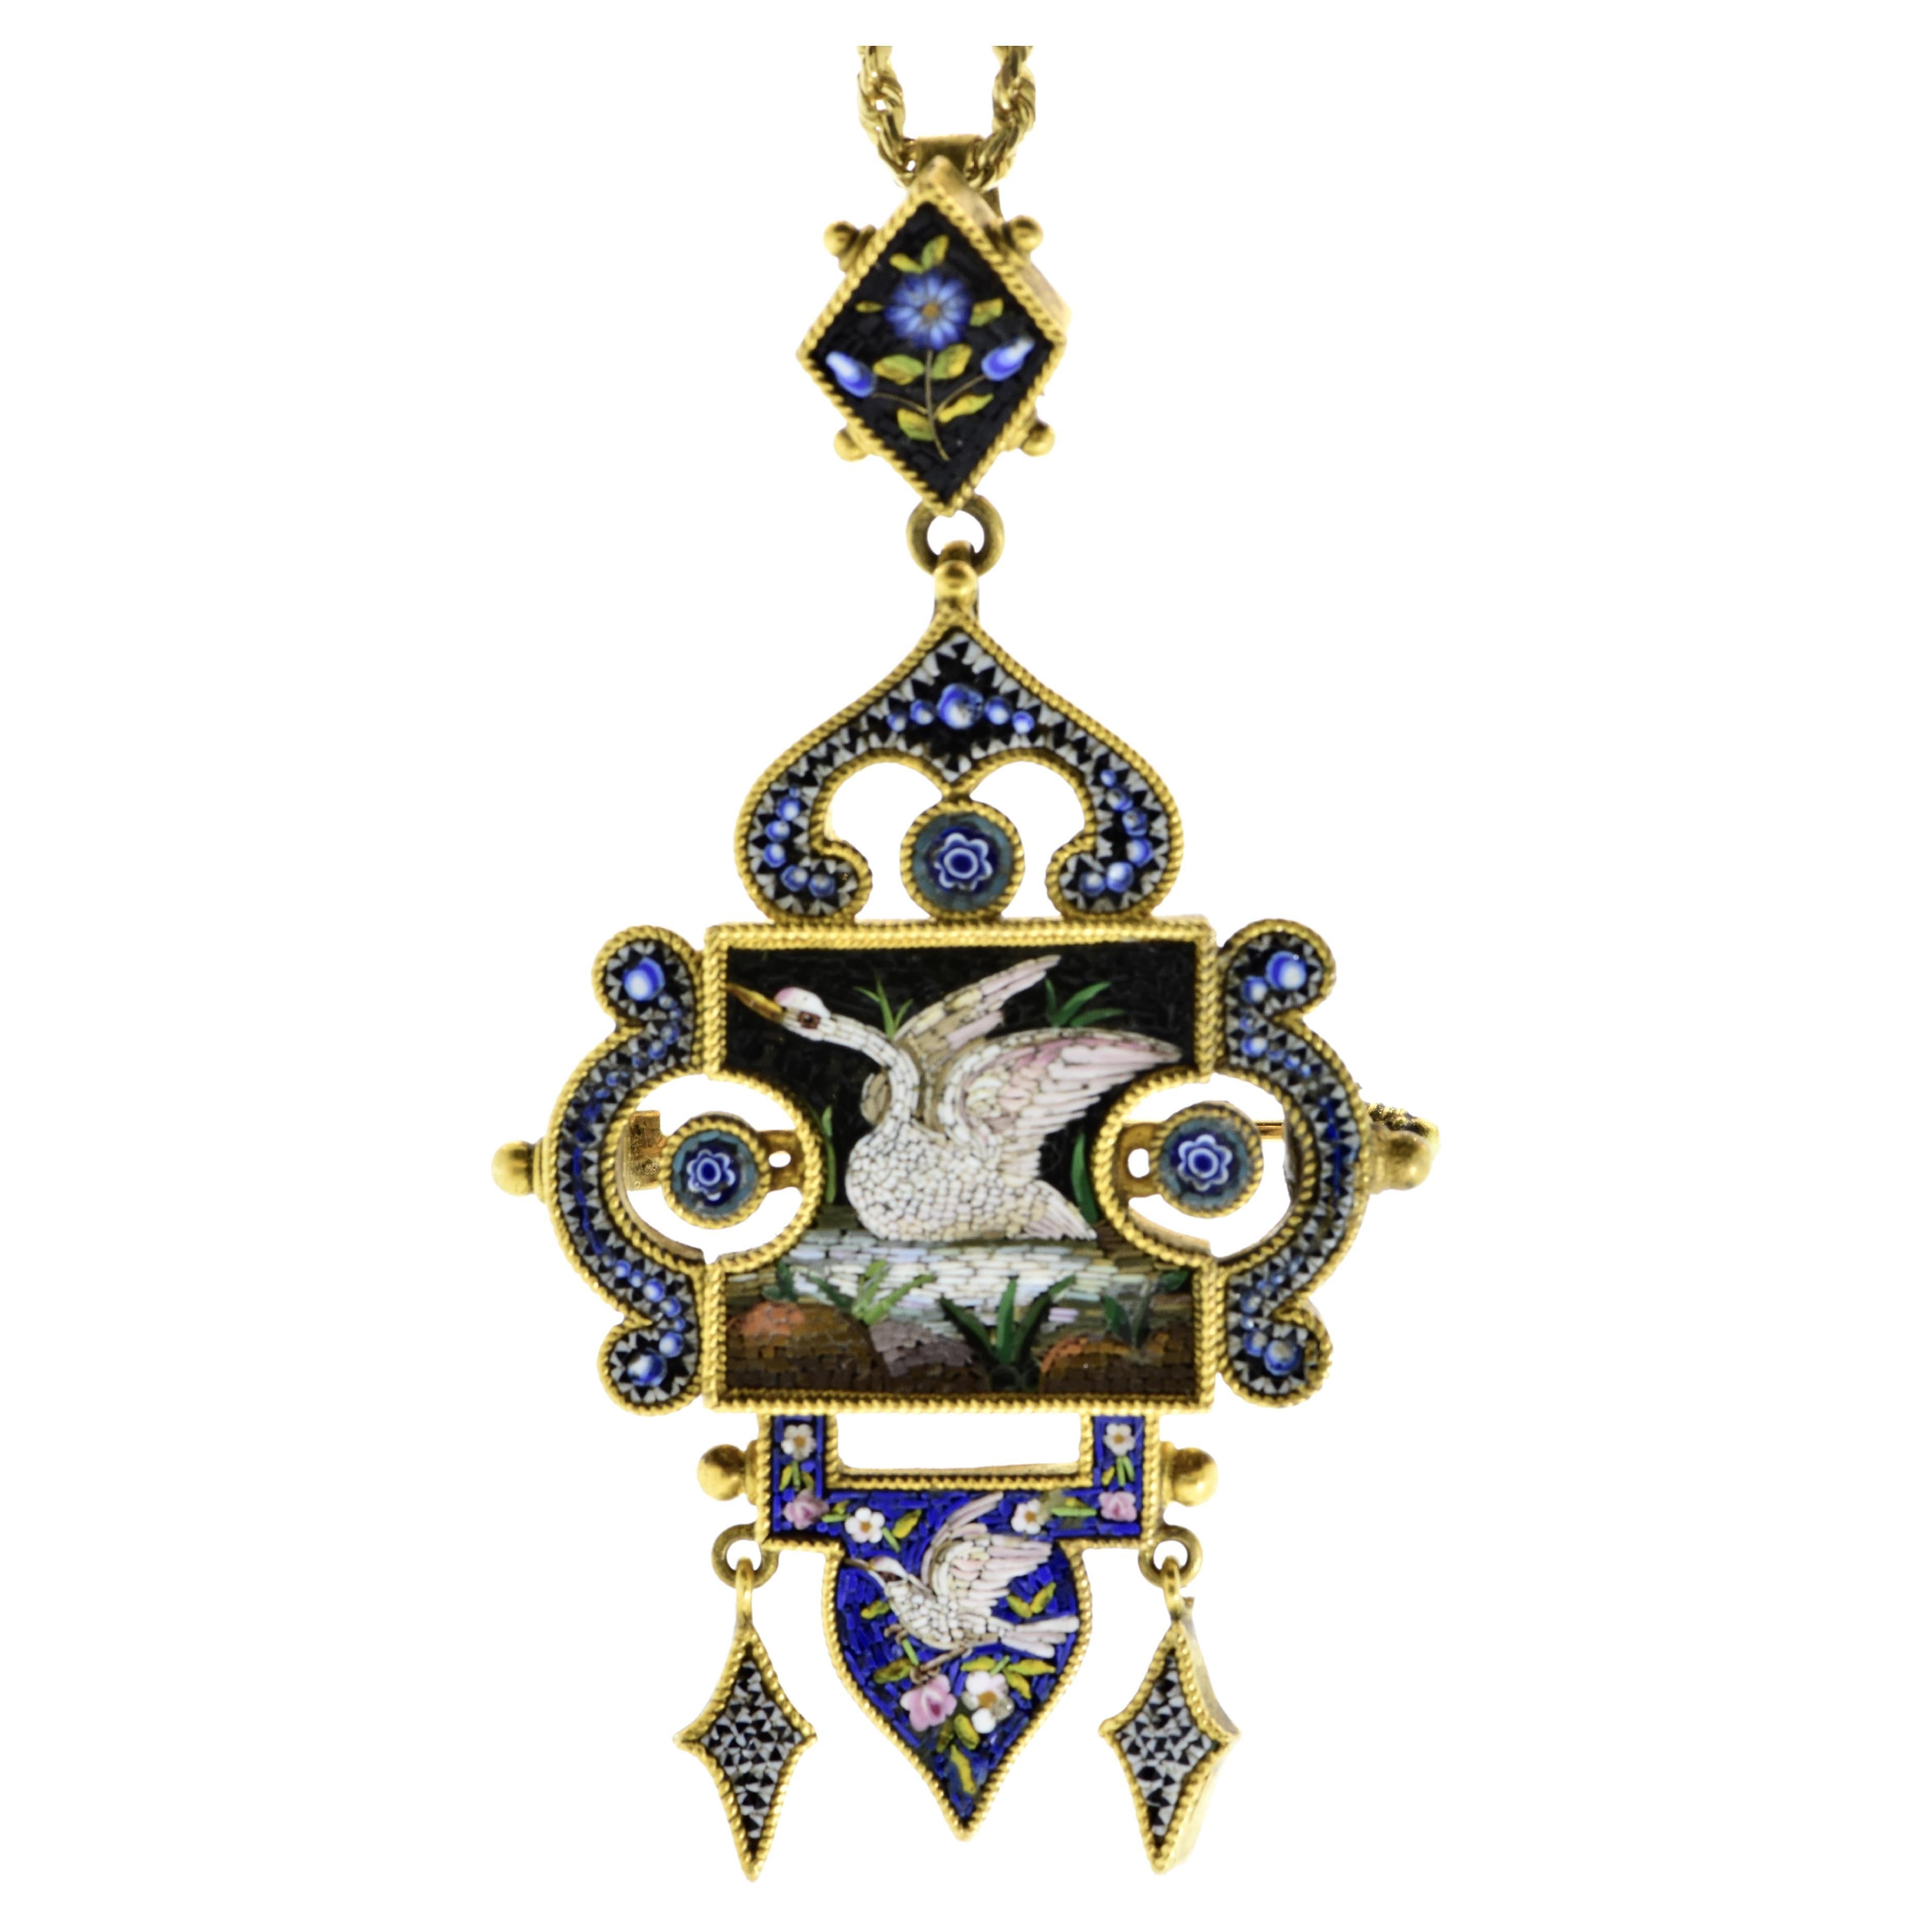 Antique Micro Mosaic 18K Pendant and Brooch, c. 1880